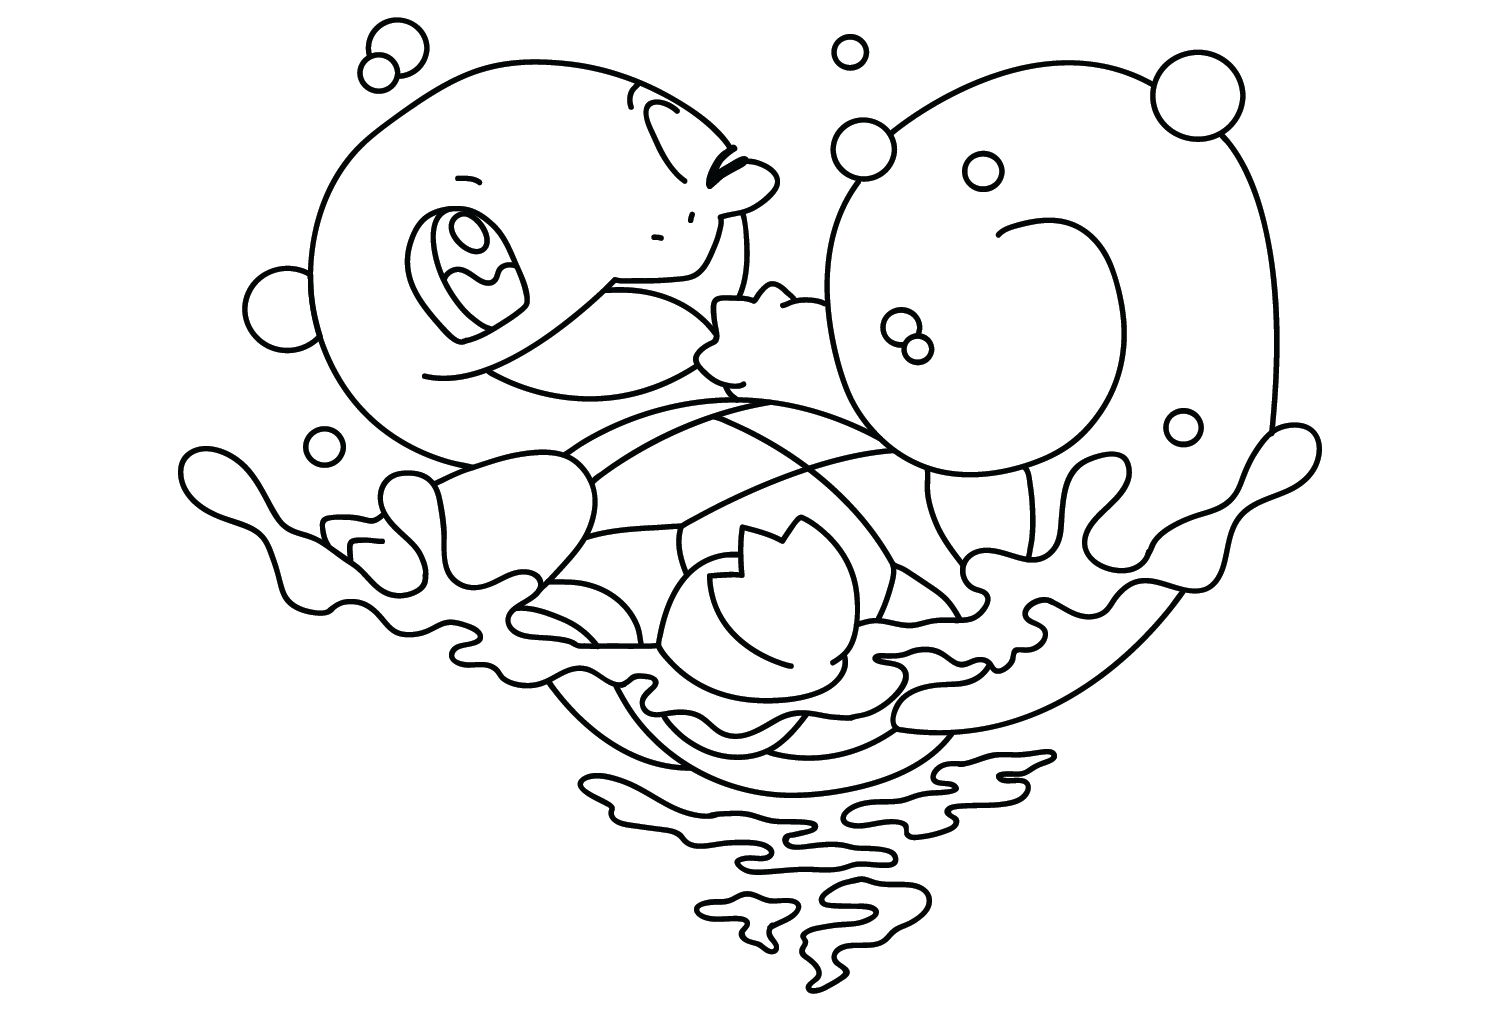 Coloring Page Pokemon Squirtle from Squirtle